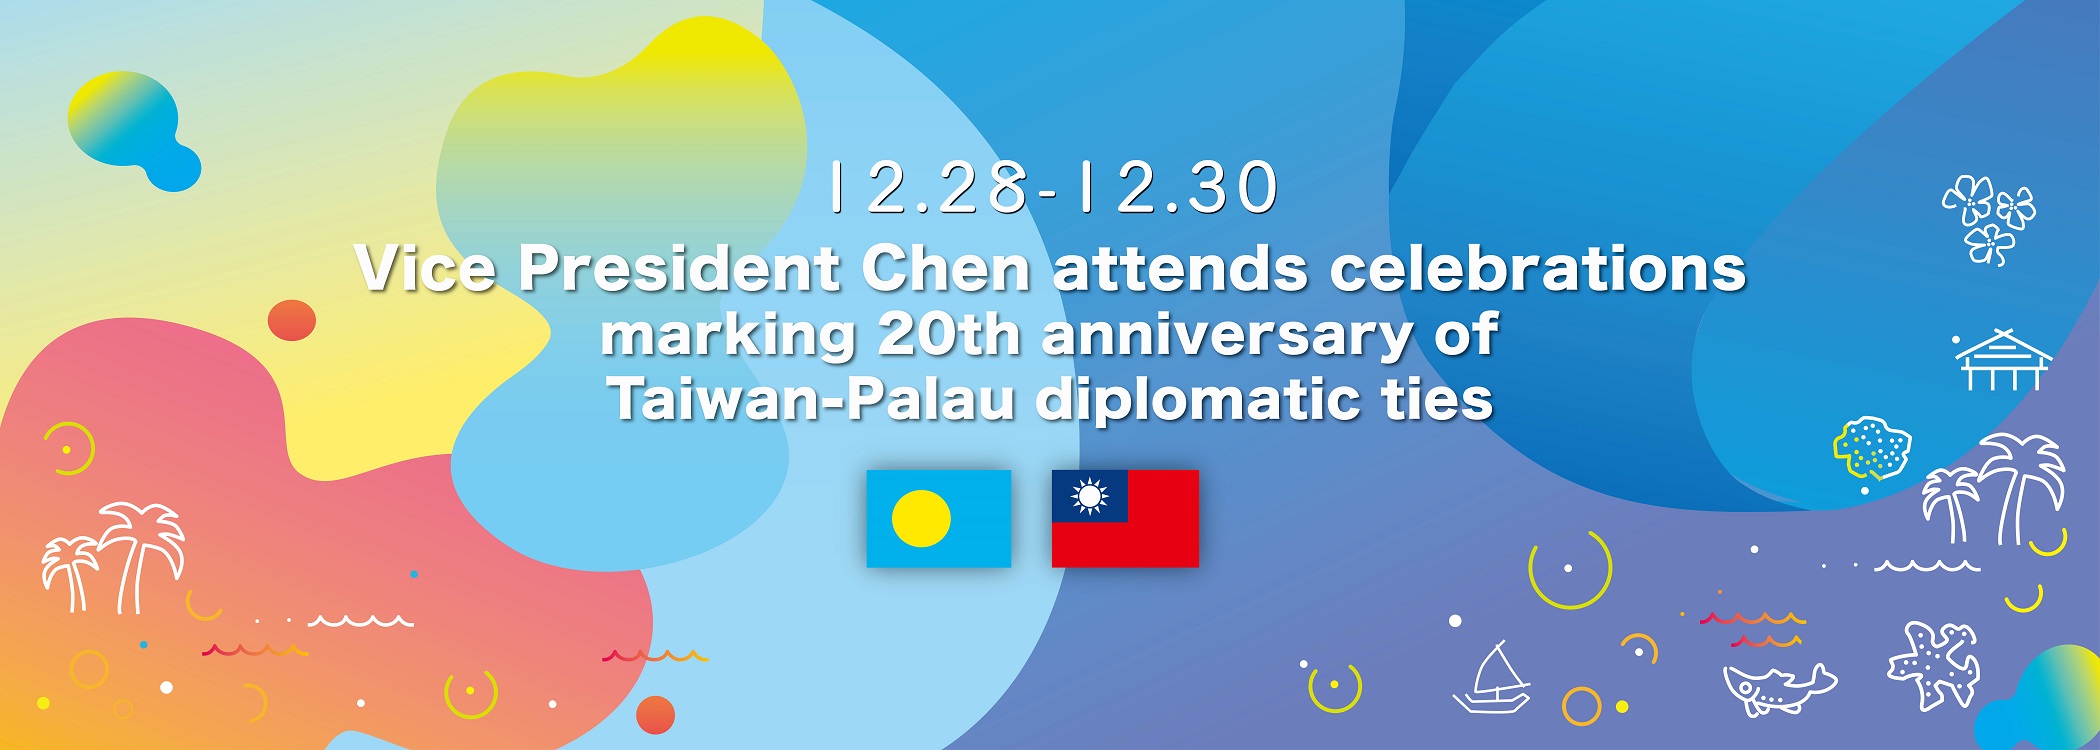 Vice President Chen attends celebrations marking 20th anniversary of Taiwan-Palau diplomatic ties